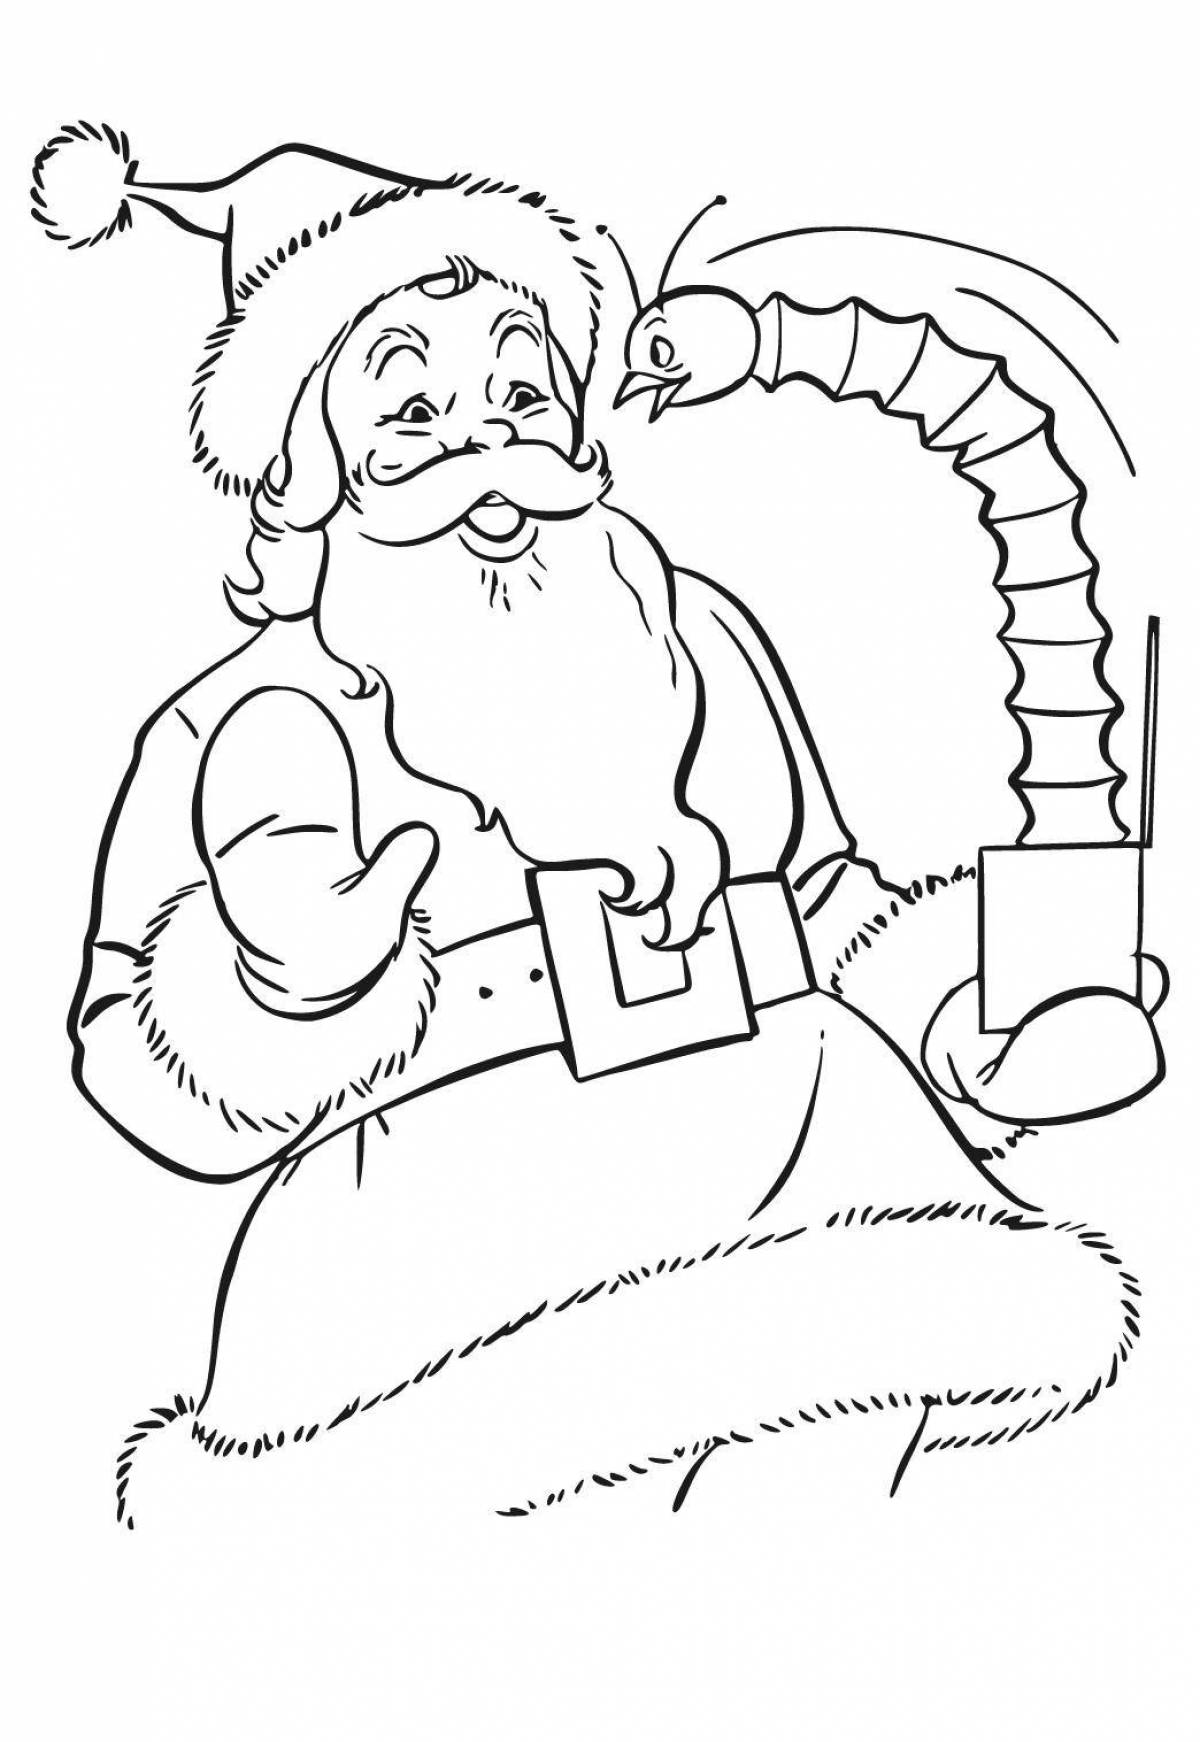 Amazing korbobo coloring page